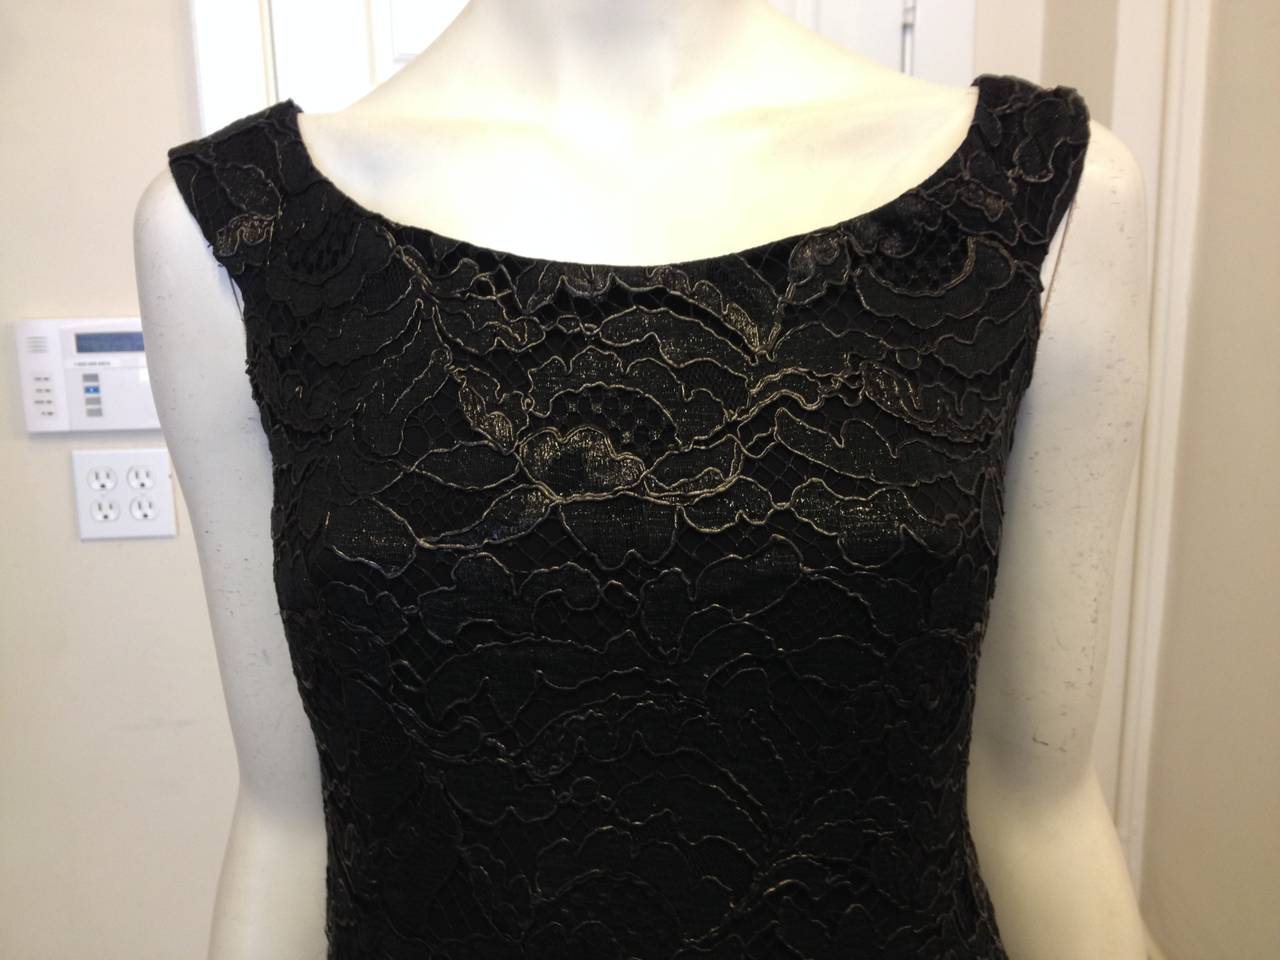 Black lace takes on an edgier role for this Gucci dress - coated with a super thin rubberized layer, it has a matte finish and a futuristic texture. The boatneck cut and slim shoulder straps add a classic look to the piece, cutting the innovative